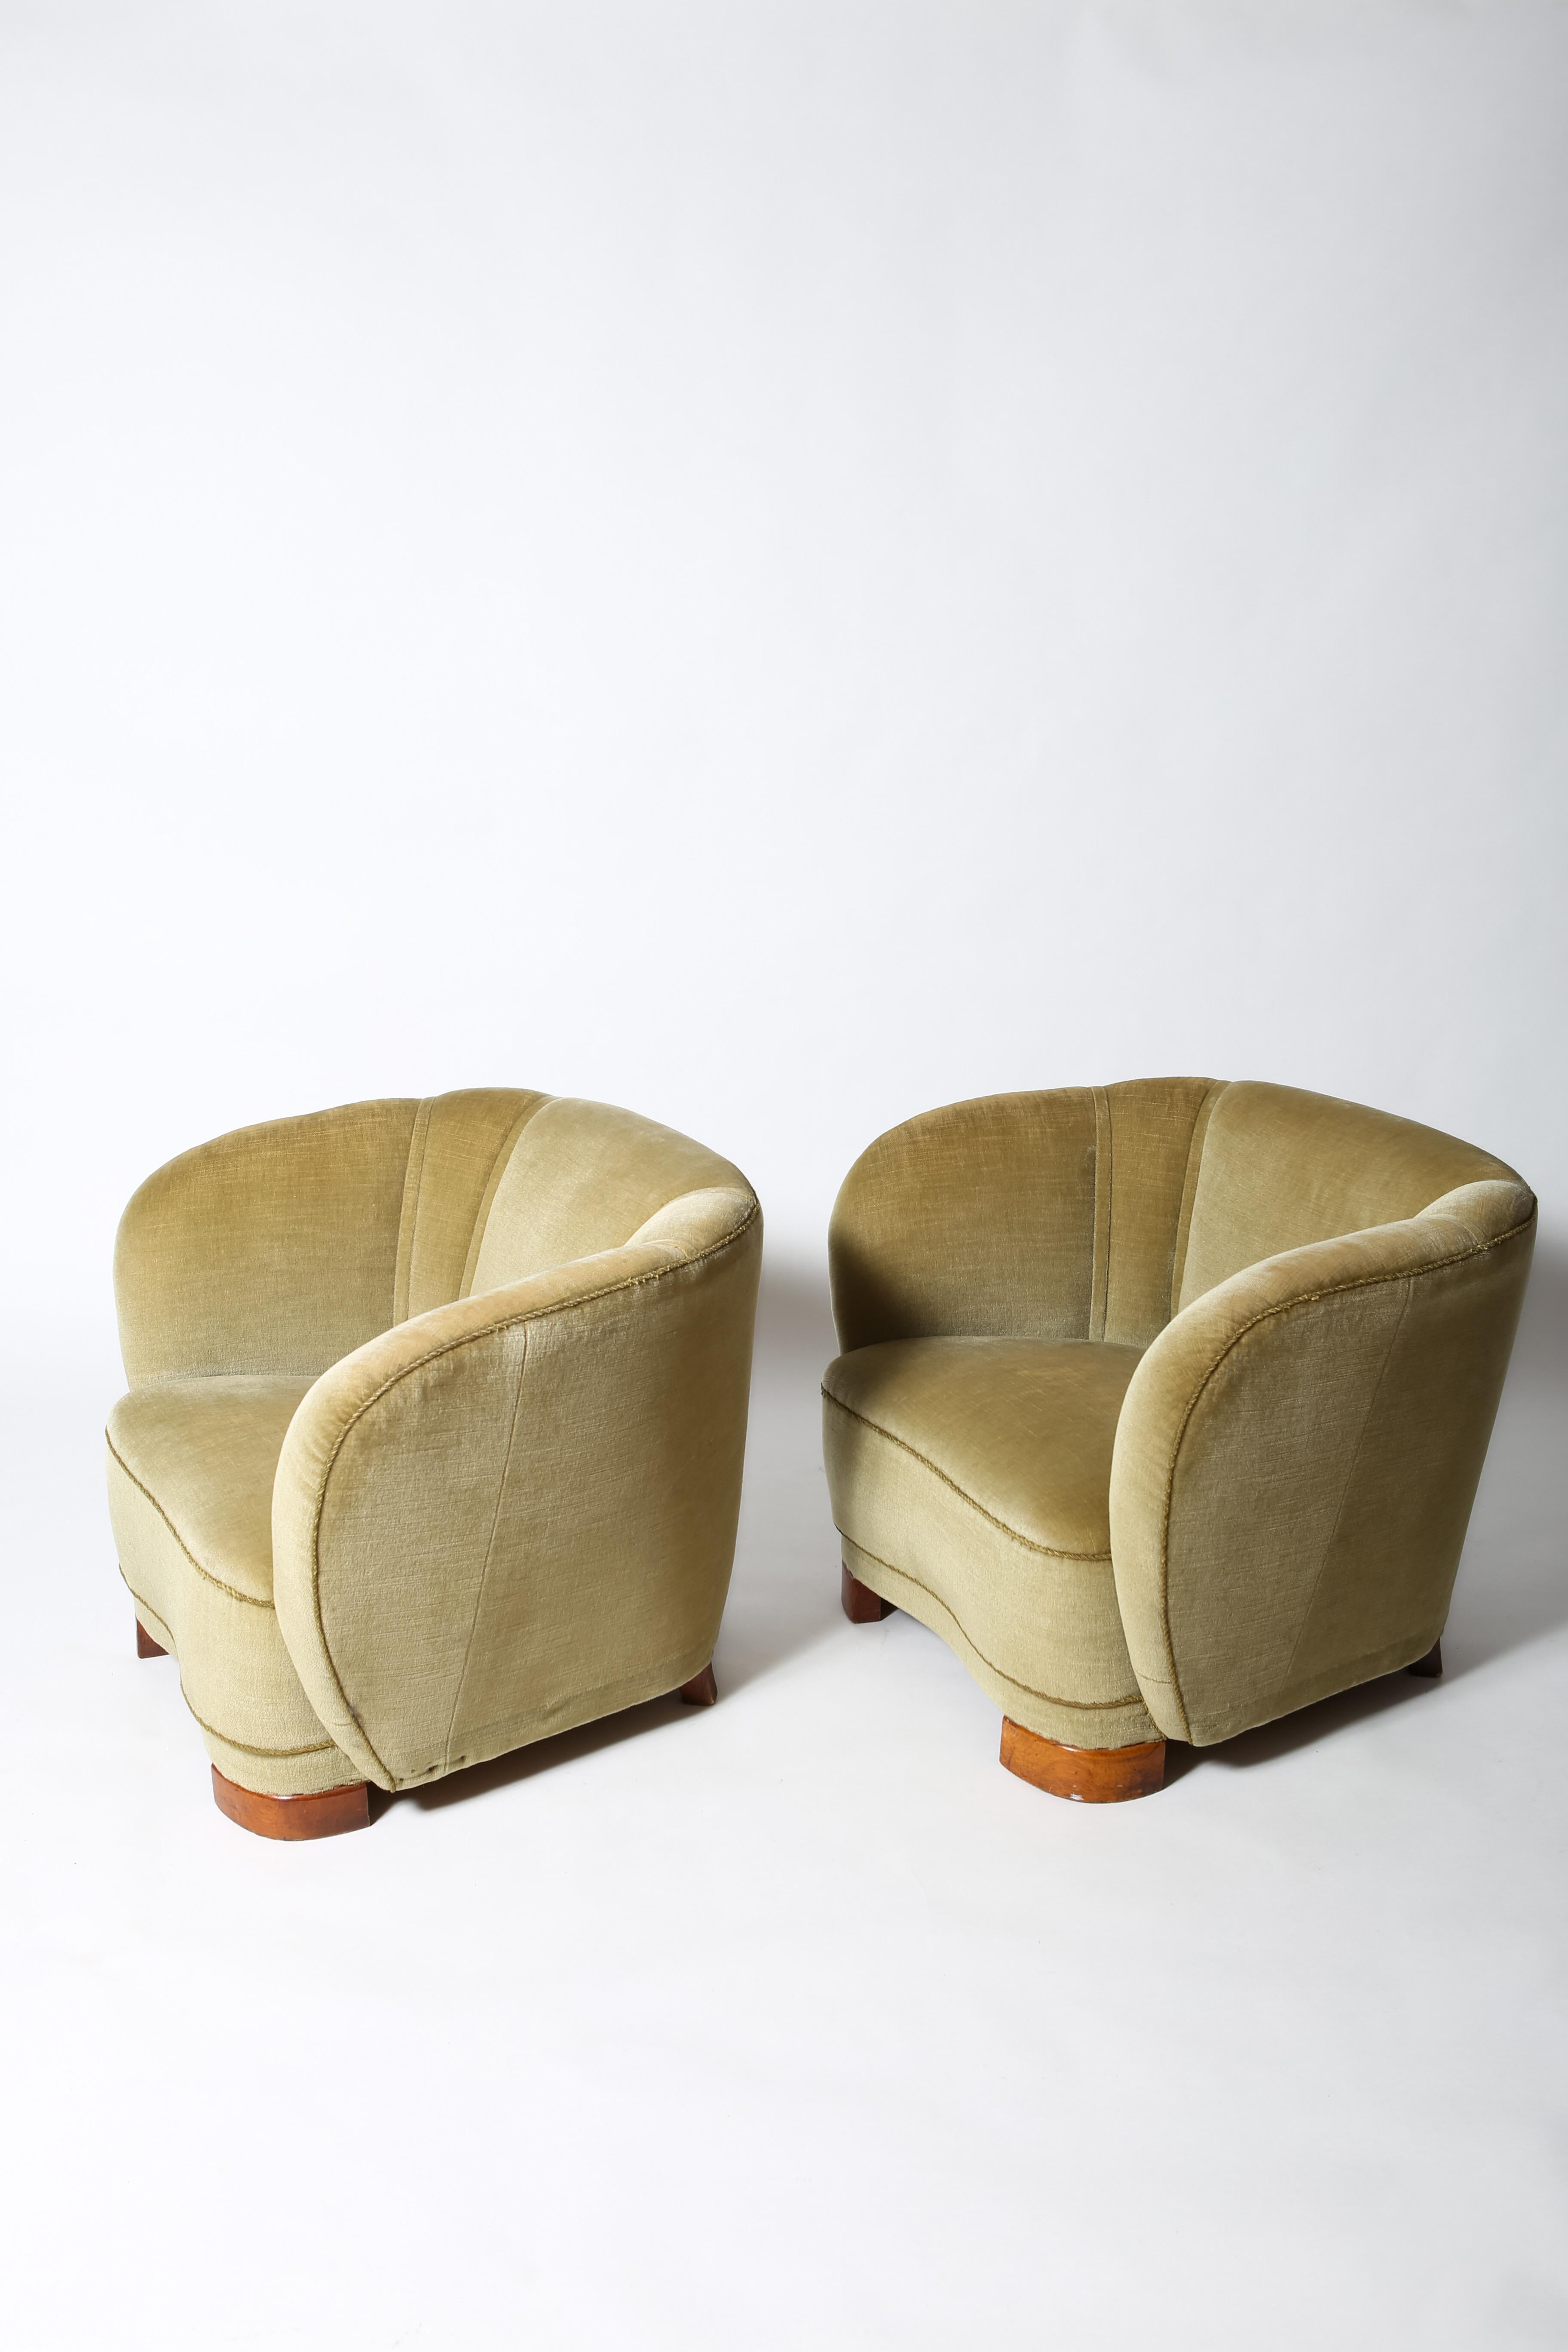 Danish cabinetmaker art deco club chairs. Wonderful curves; original mohair velvet upholstery. Extremely well-built. Sold as pair.